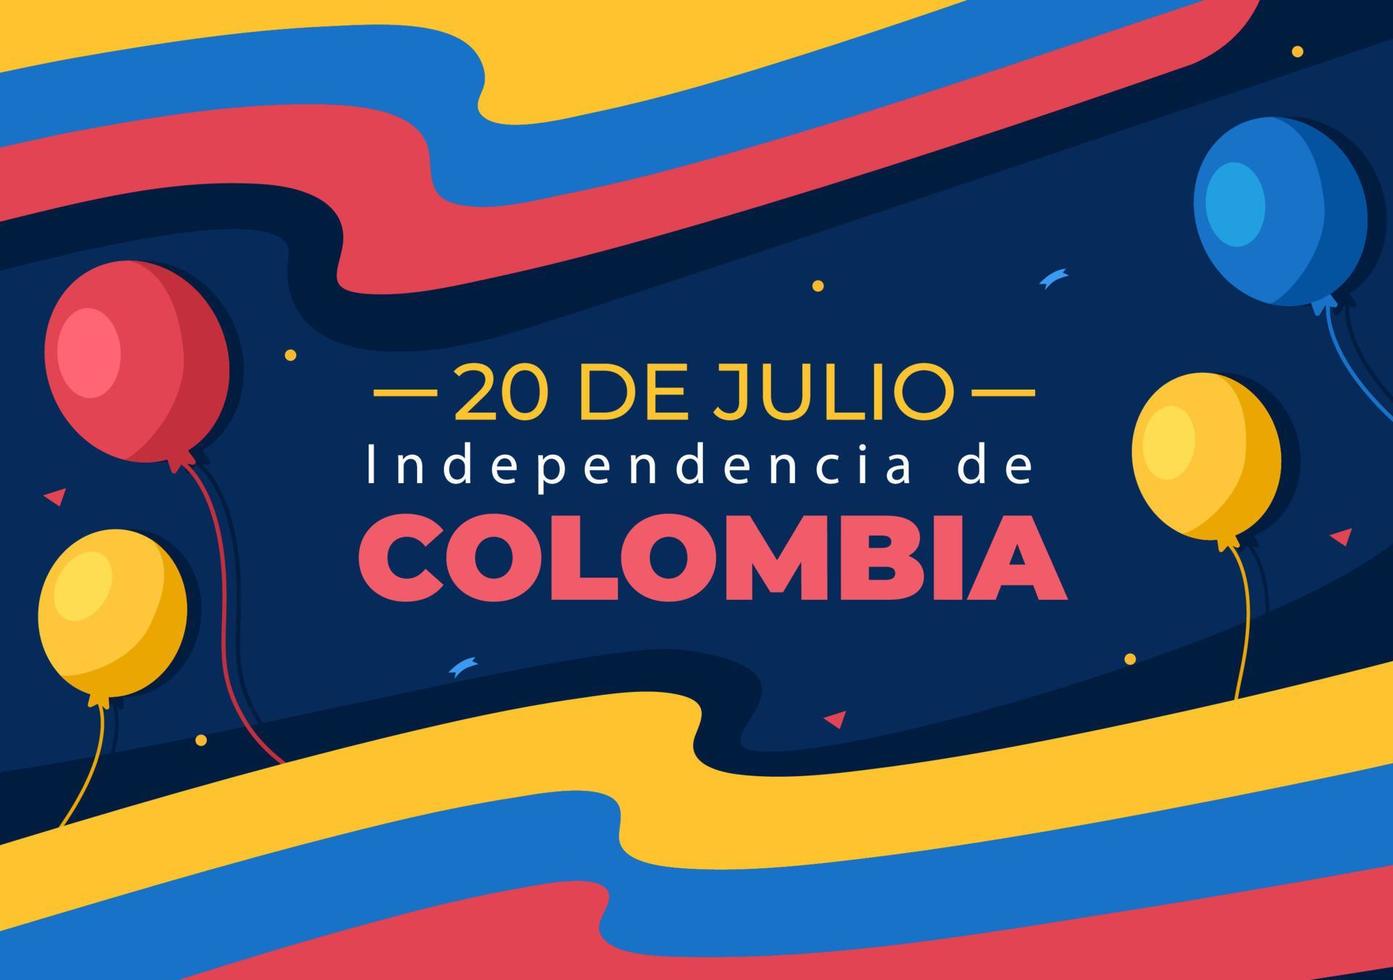 20 De Julio independencia De Colombia Cartoon Illustration with Flags and Balloons for Poster Style Design vector